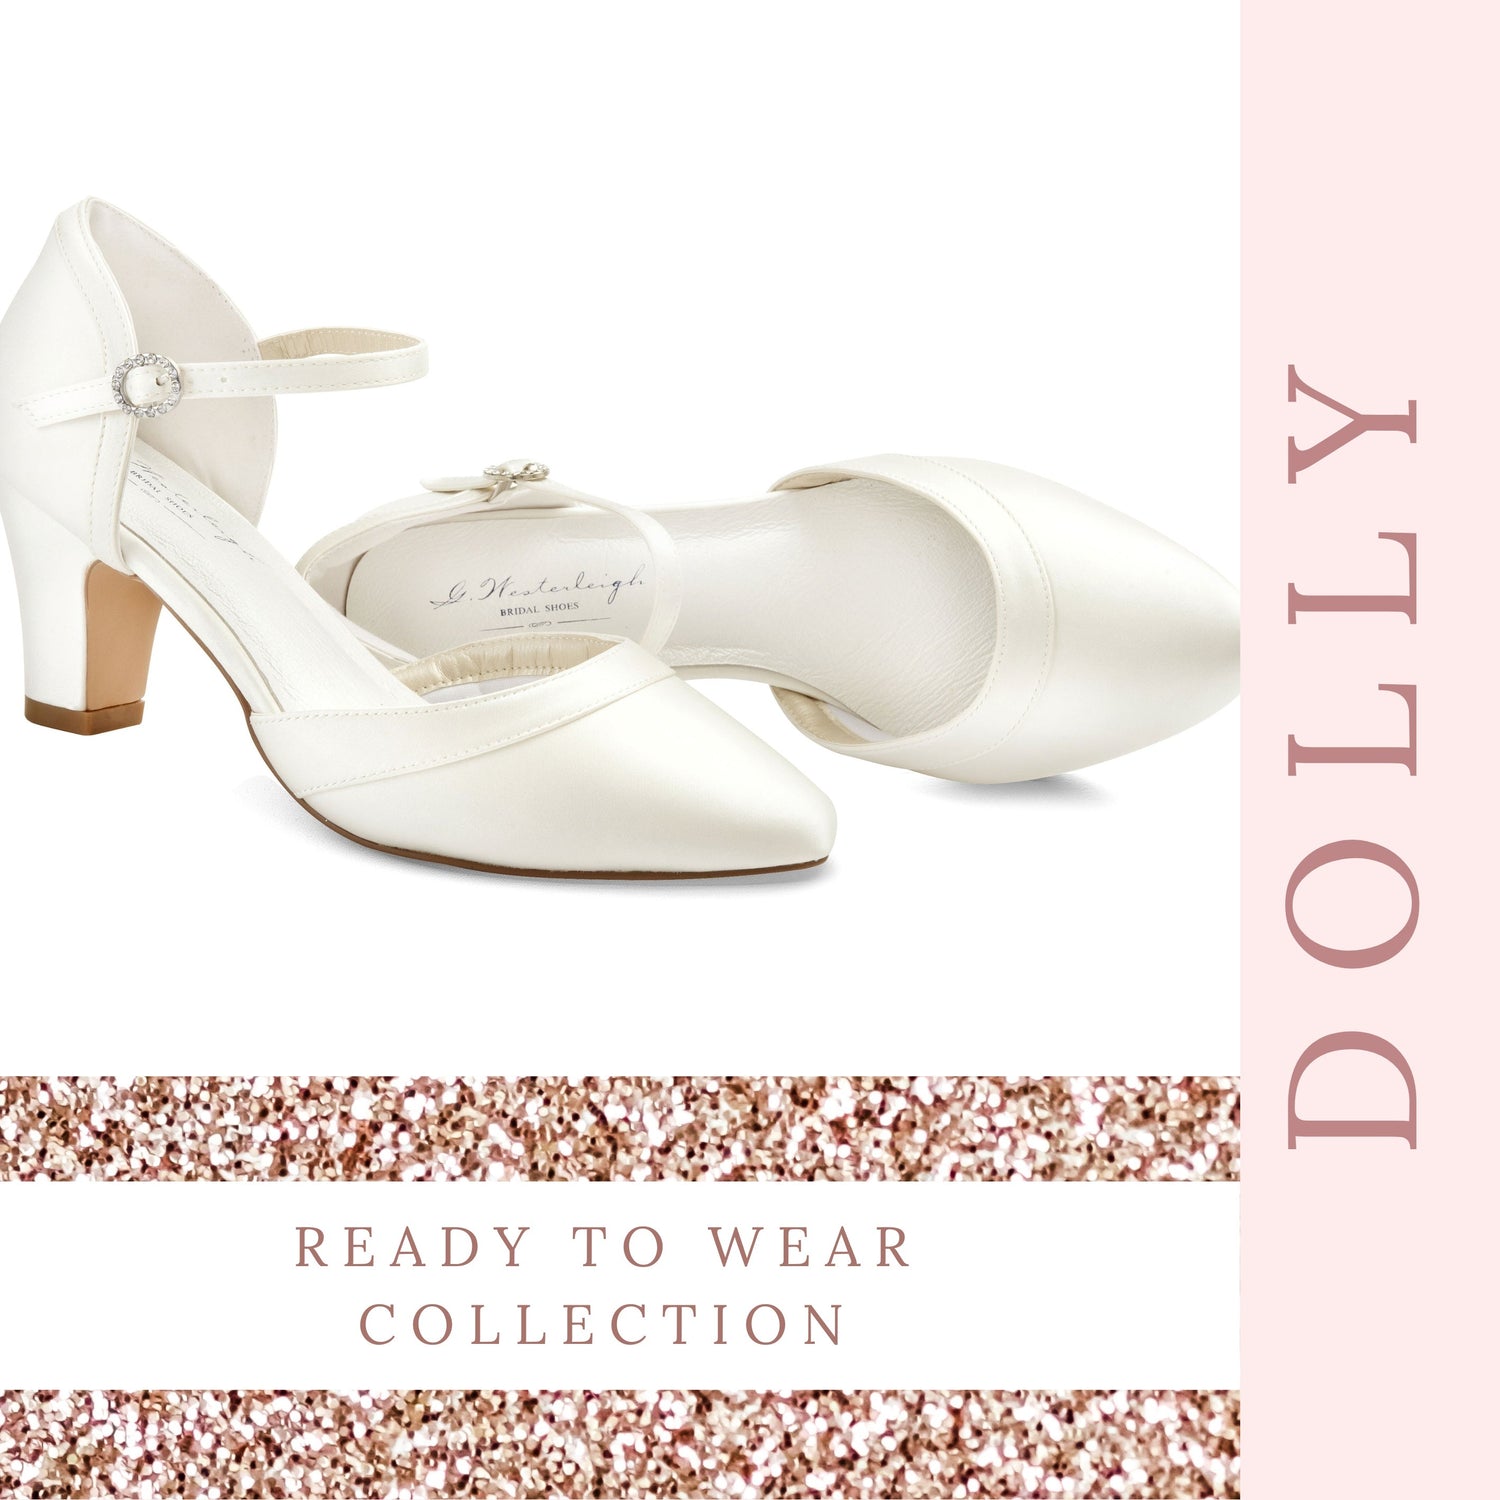 pointed-toe-wedding-shoes